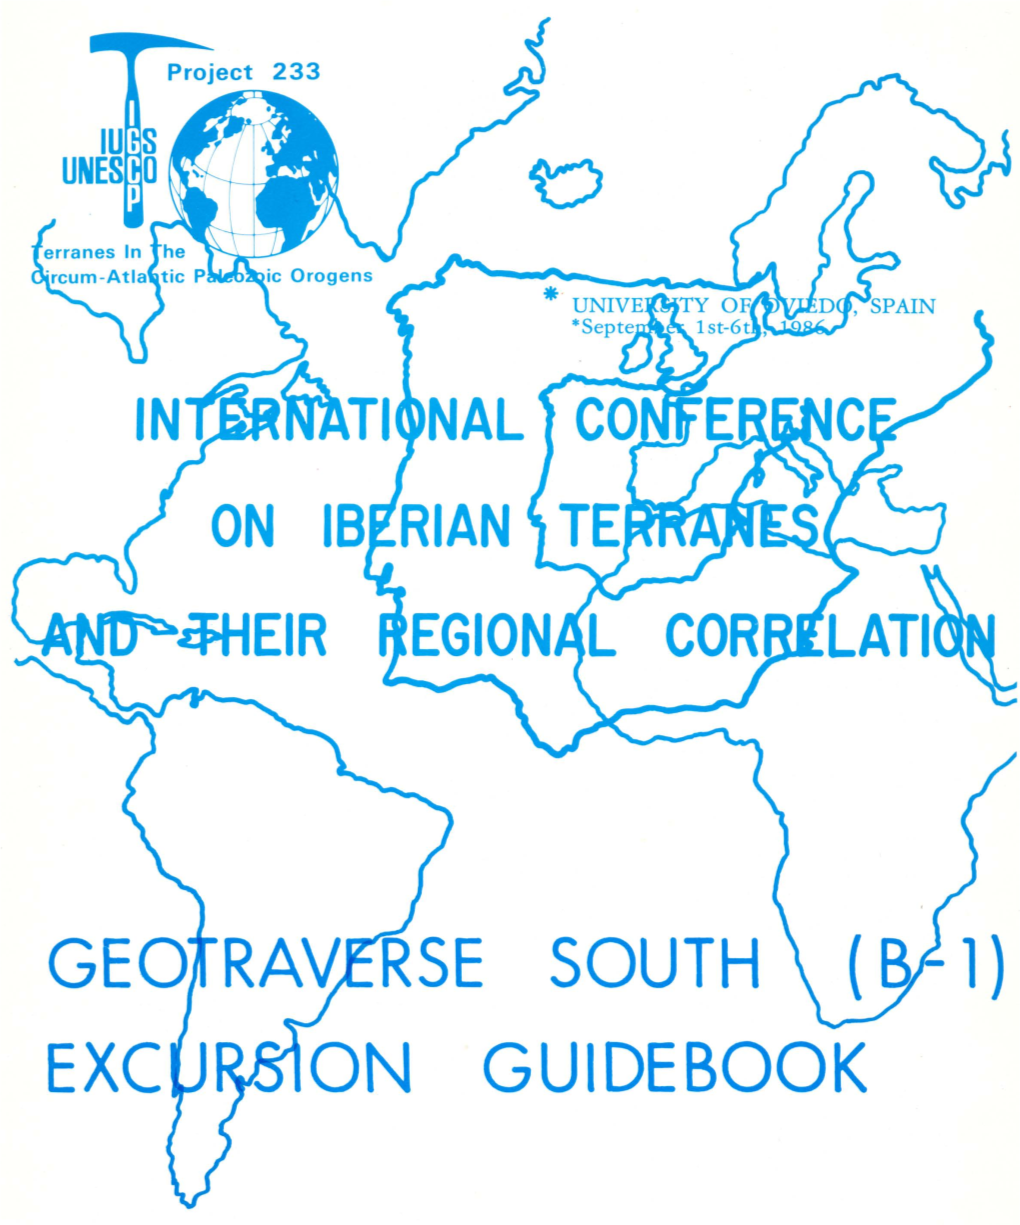 Geo Rav Rse South on Guidebook International Conference on Iberian Terranes and Their Regional Correlation